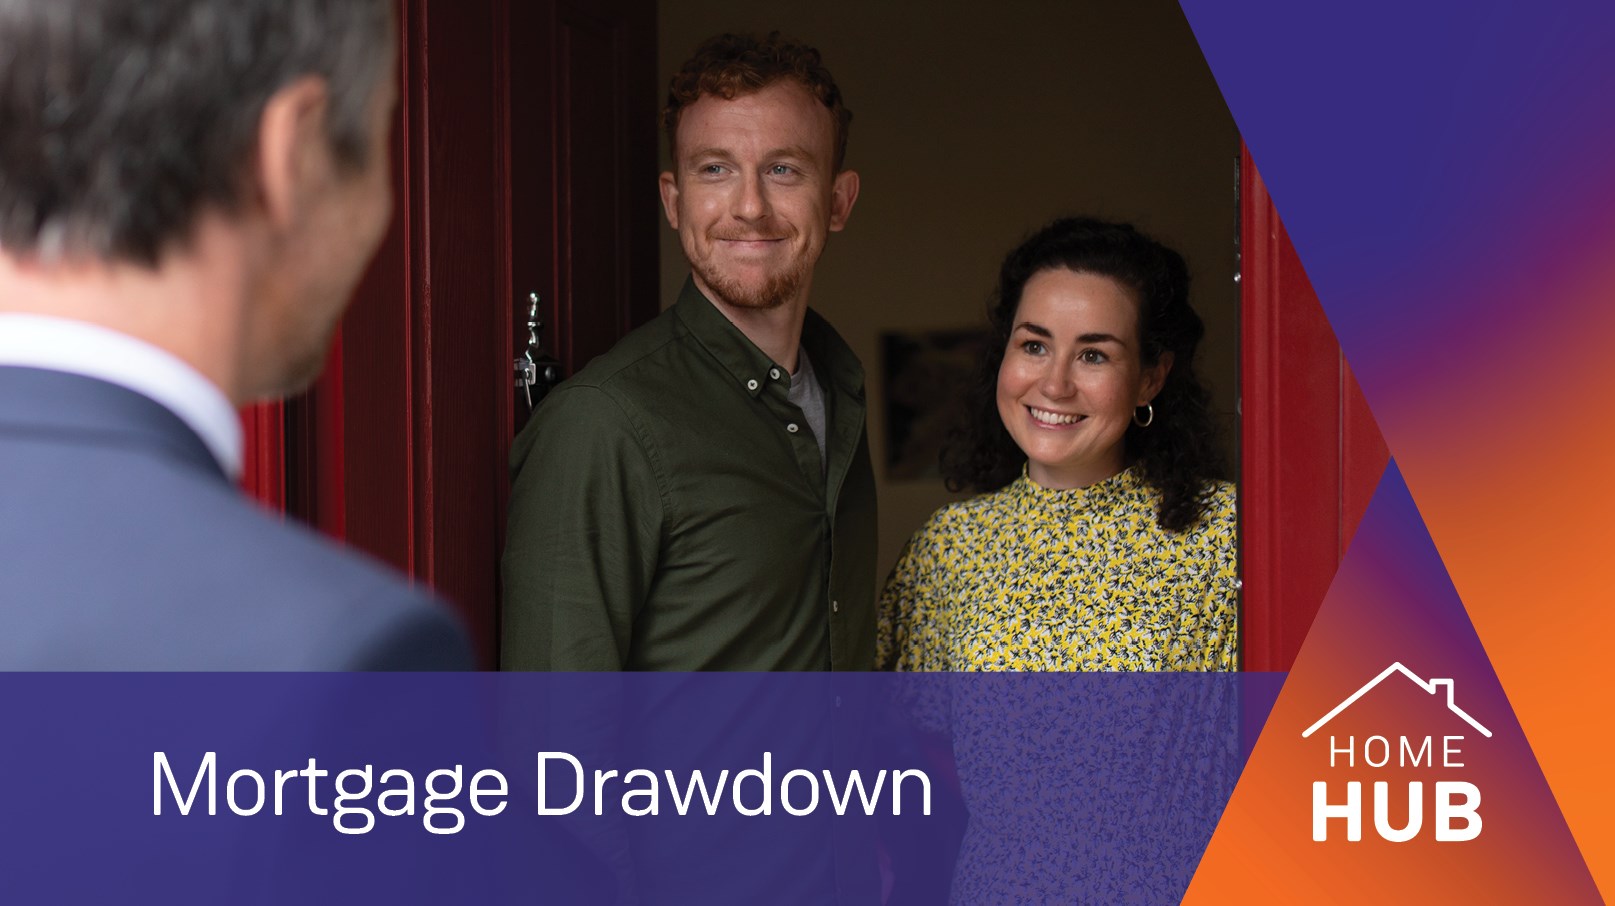 Banner with image showing Couple in the open door smiling to a man in a suit, text 'Mortgage Drawdown'